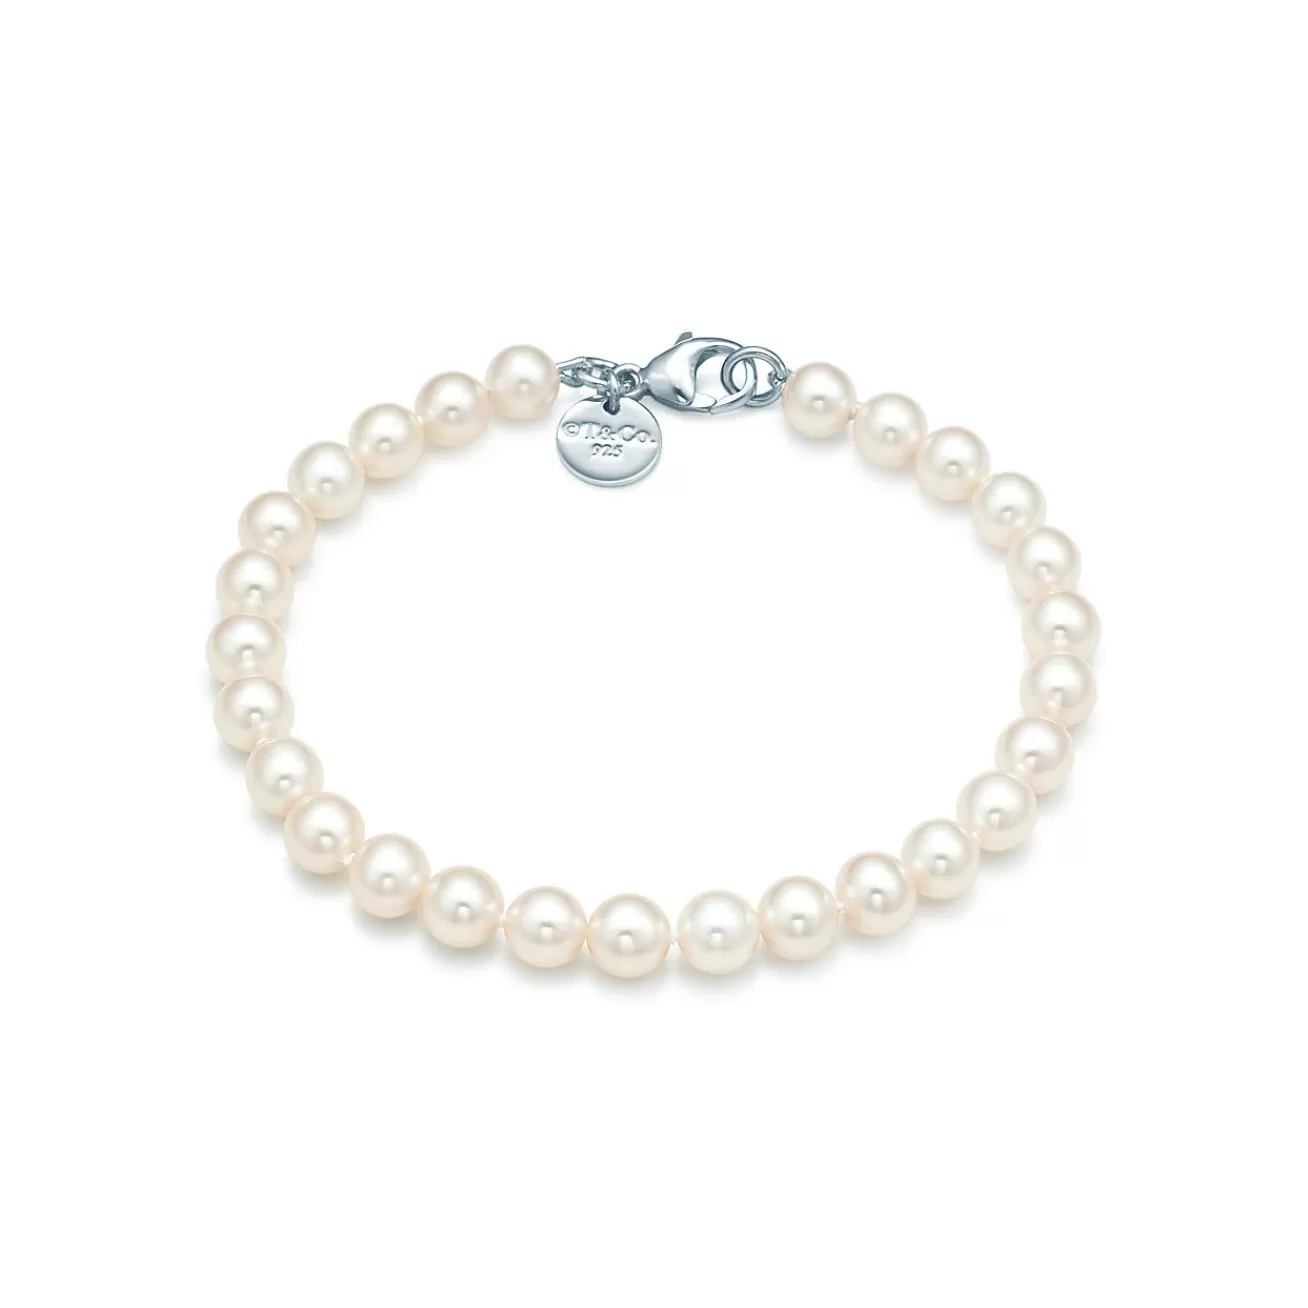 Tiffany & Co. Ziegfeld Collection bracelet of freshwater cultured pearls with a silver clasp. | ^ Bracelets | Sterling Silver Jewelry